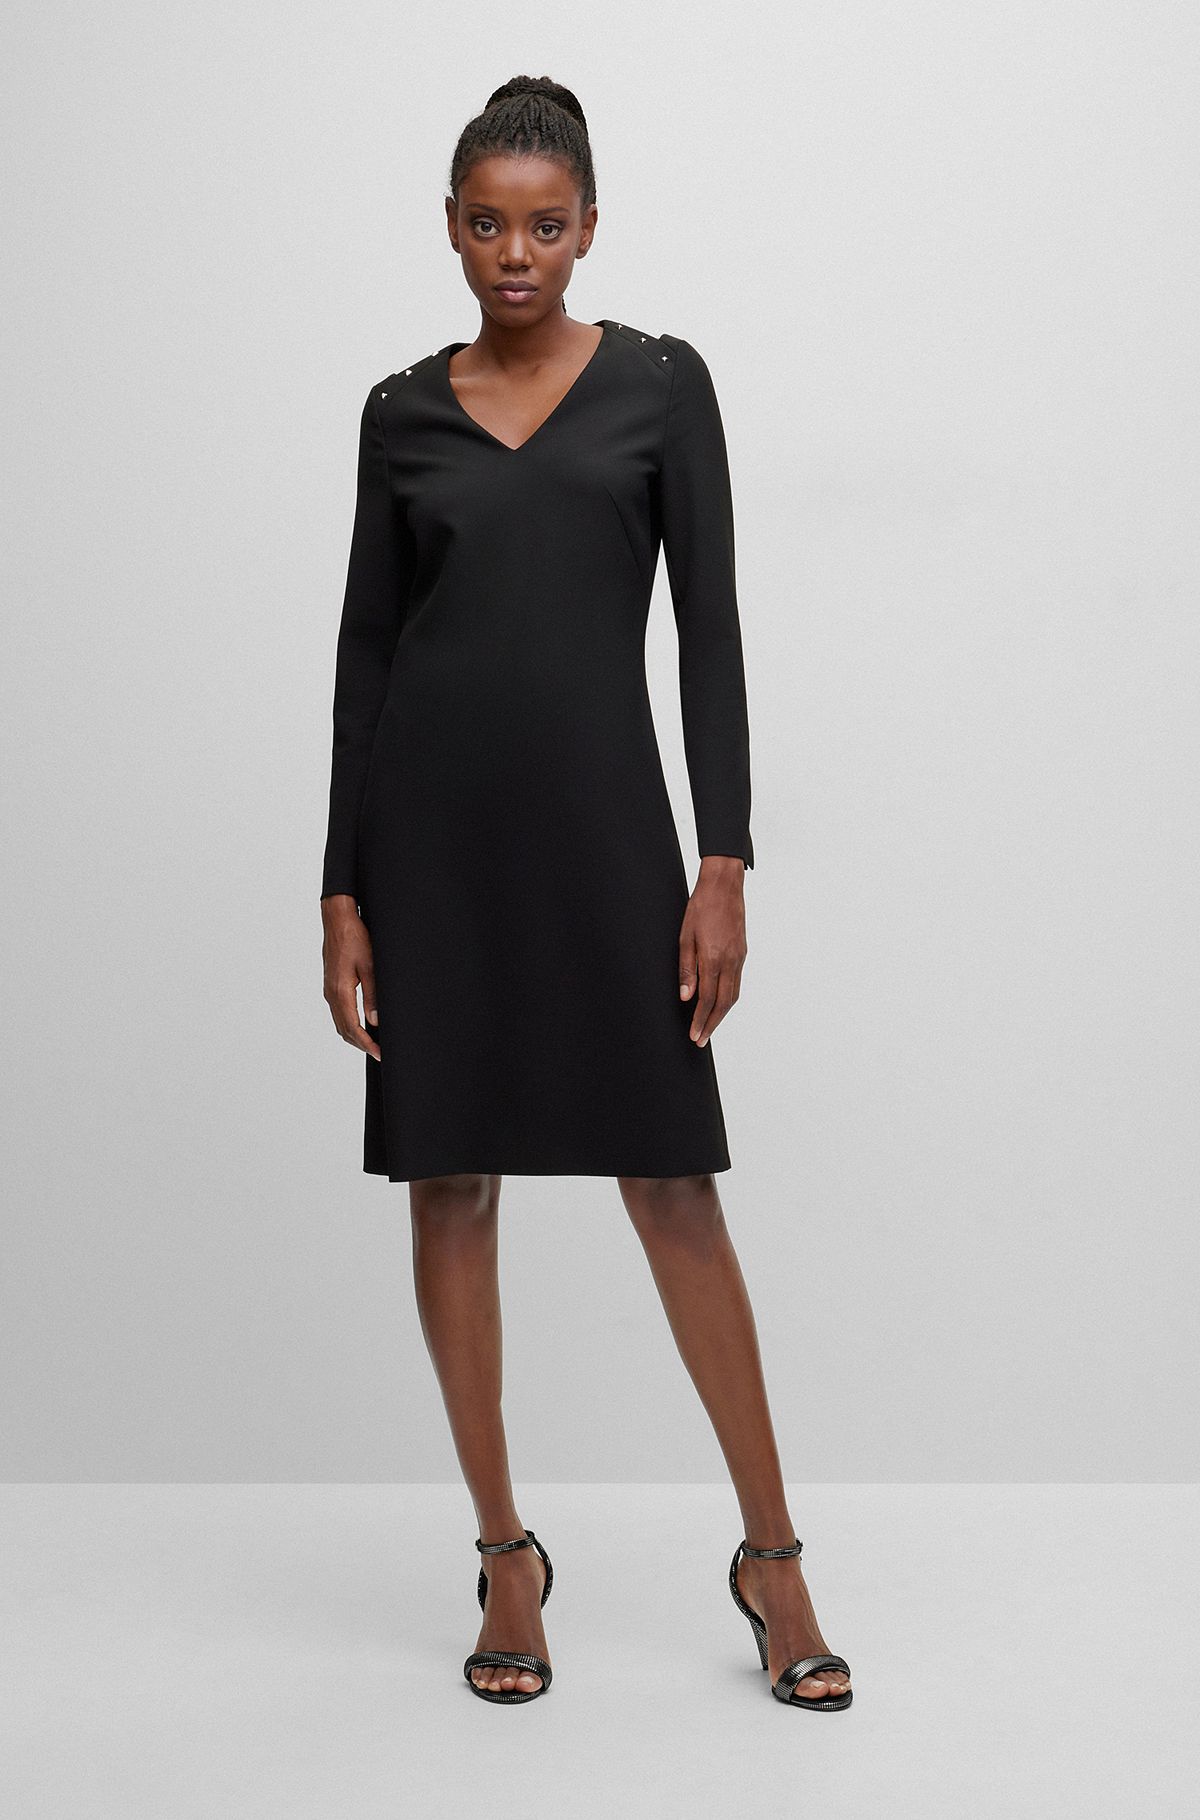 Slim-fit dress with cut-out and stud details, Black